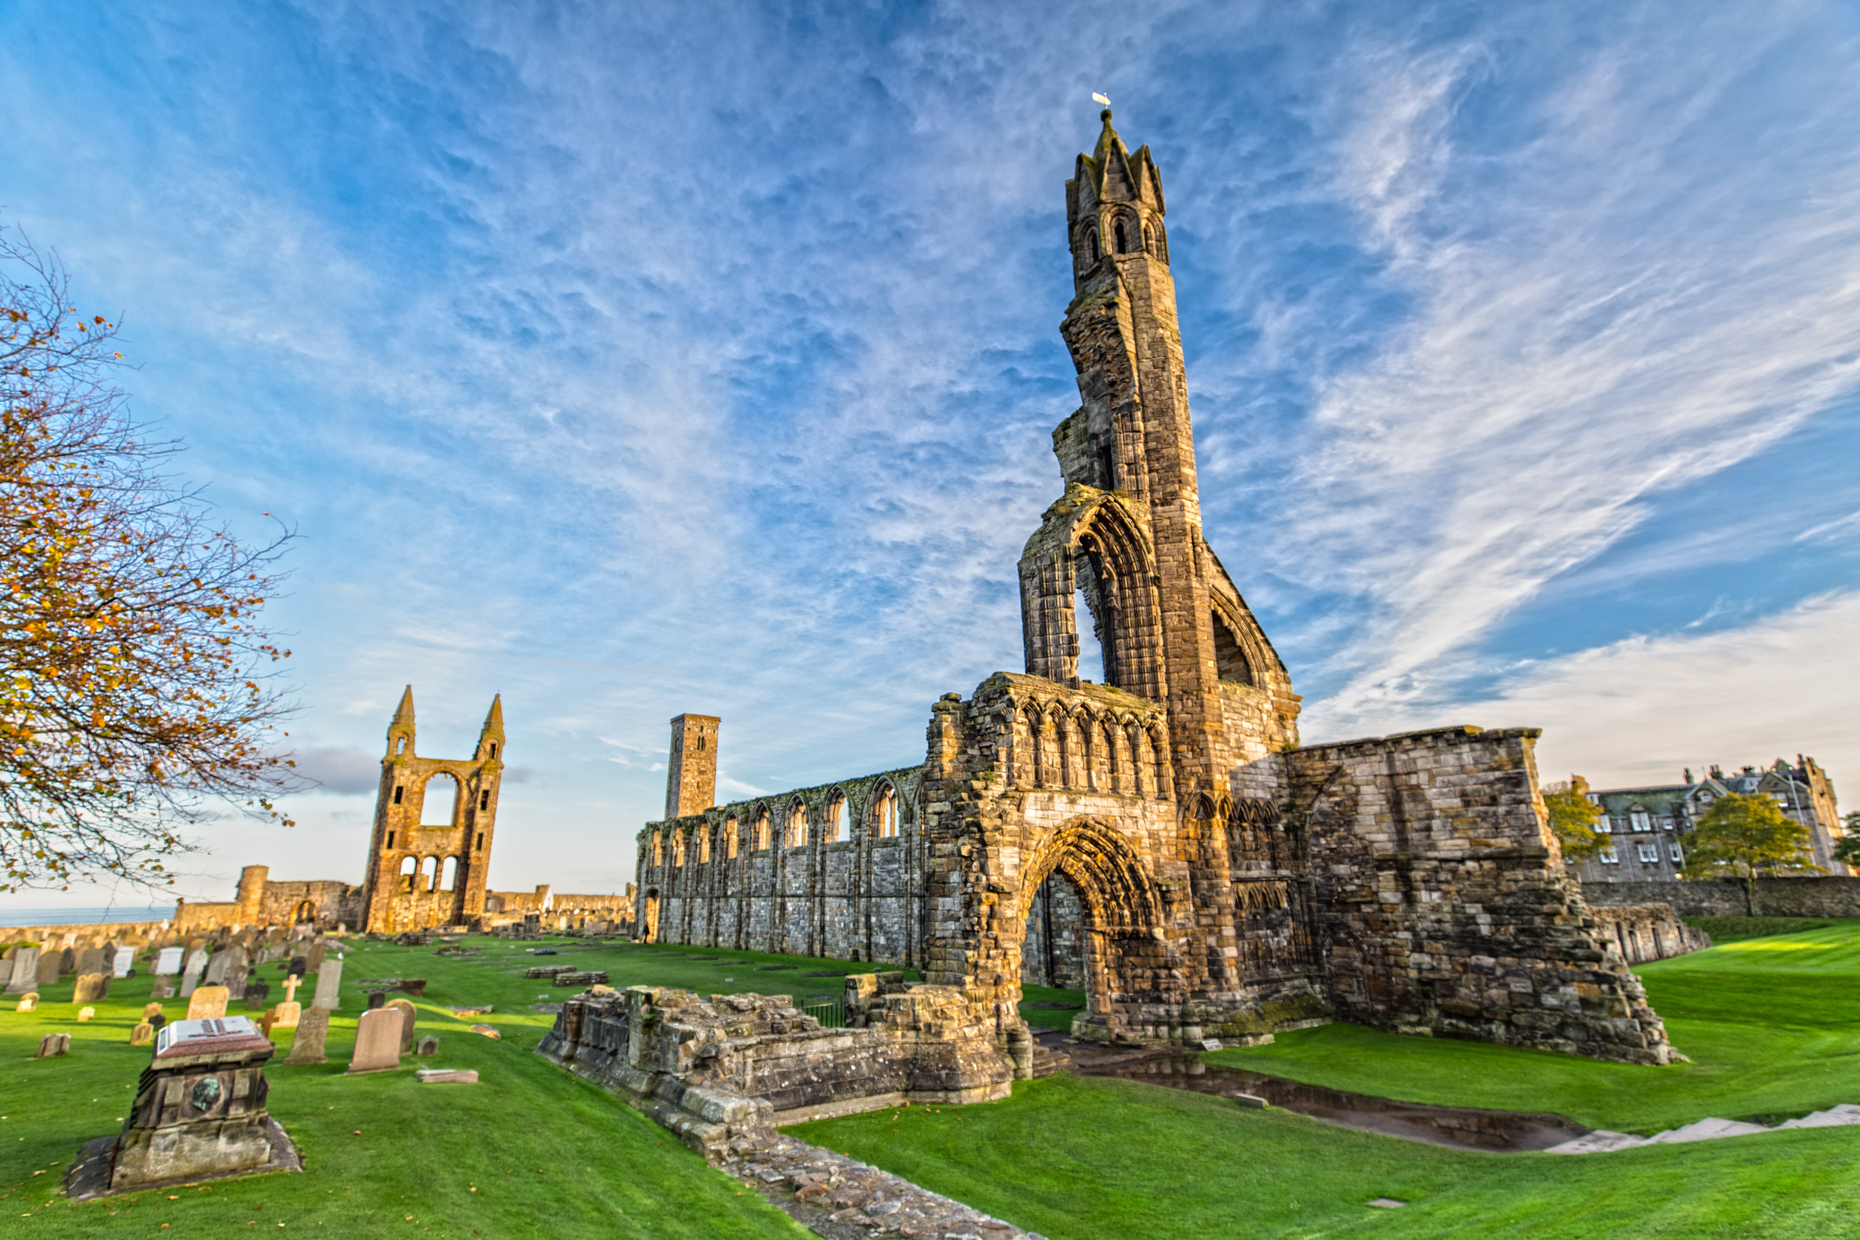 <a href="https://standrews.com/homepage/" rel="noreferrer noopener">St Andrews</a> is the perfect Scottish destination for golf enthusiasts. Founded in 1754, the town’s famous <a href="https://www.randa.org/en/the-royal-and-ancient-golf-club" rel="noreferrer noopener">Royal and Ancient Golf Club</a> hosts the British Open every other year. About an hour and 15 minutes by car from Edinburgh, St Andrews is also home to <a href="https://www.st-andrews.ac.uk/" rel="noreferrer noopener">Scotland’s oldest university</a>, the ruins of St Andrews Cathedral, and beautiful beaches like <a href="https://www.visitscotland.com/info/see-do/st-andrews-west-sands-p2571211" rel="noreferrer noopener">West Sands</a>.